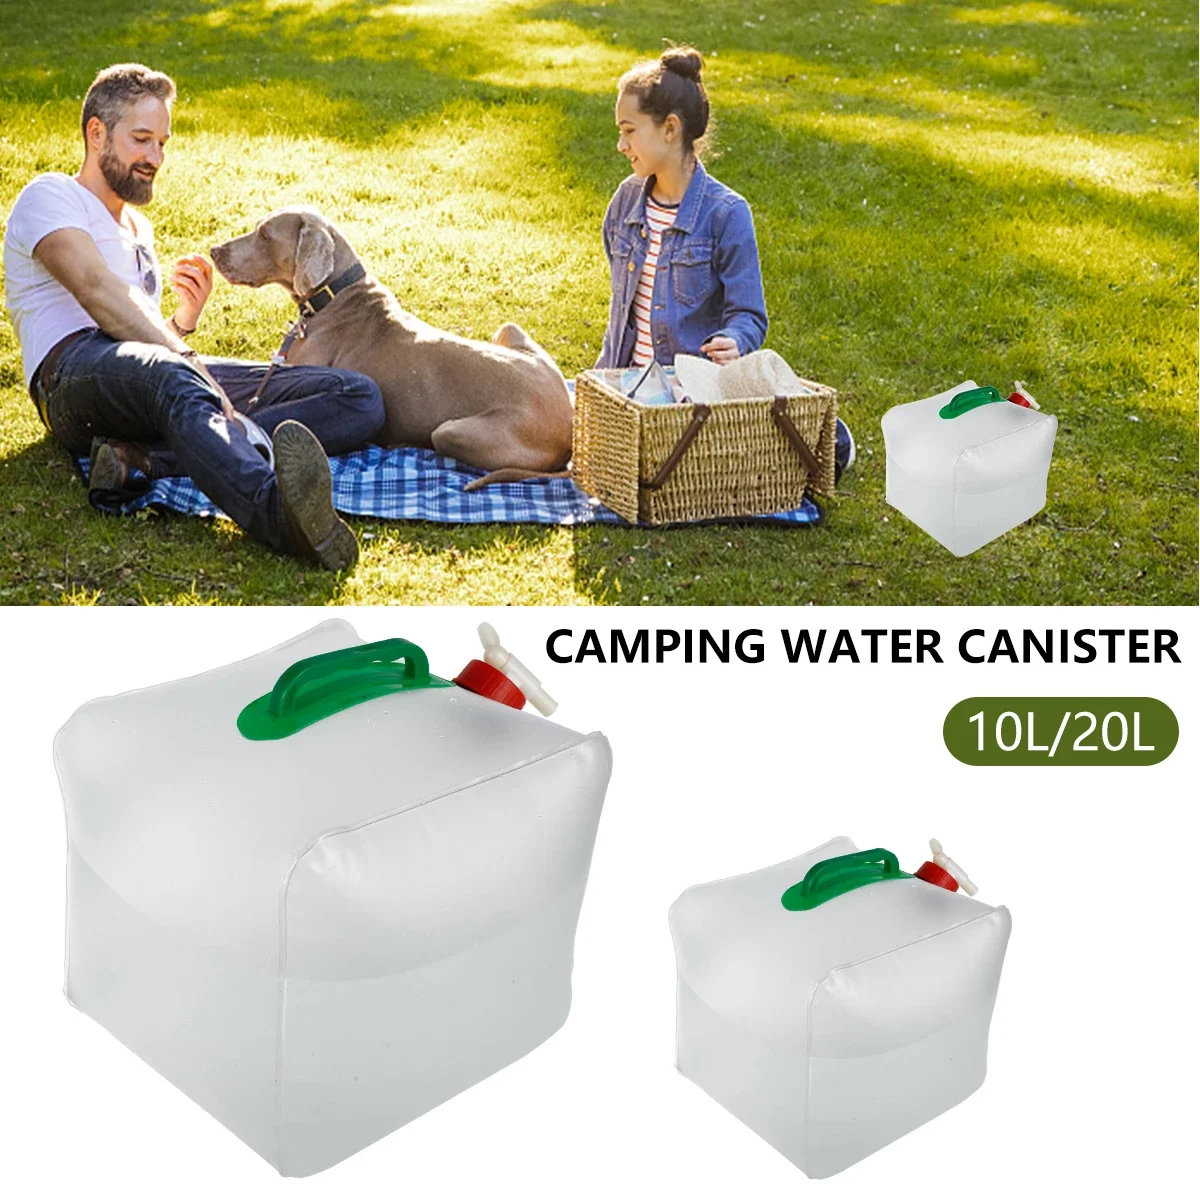 10/20L Foldable Camping Water Canisters with Tap BPA-free PVC Water Storage Bag Water Bucket Outdoor Hiking Drinking Water Tank